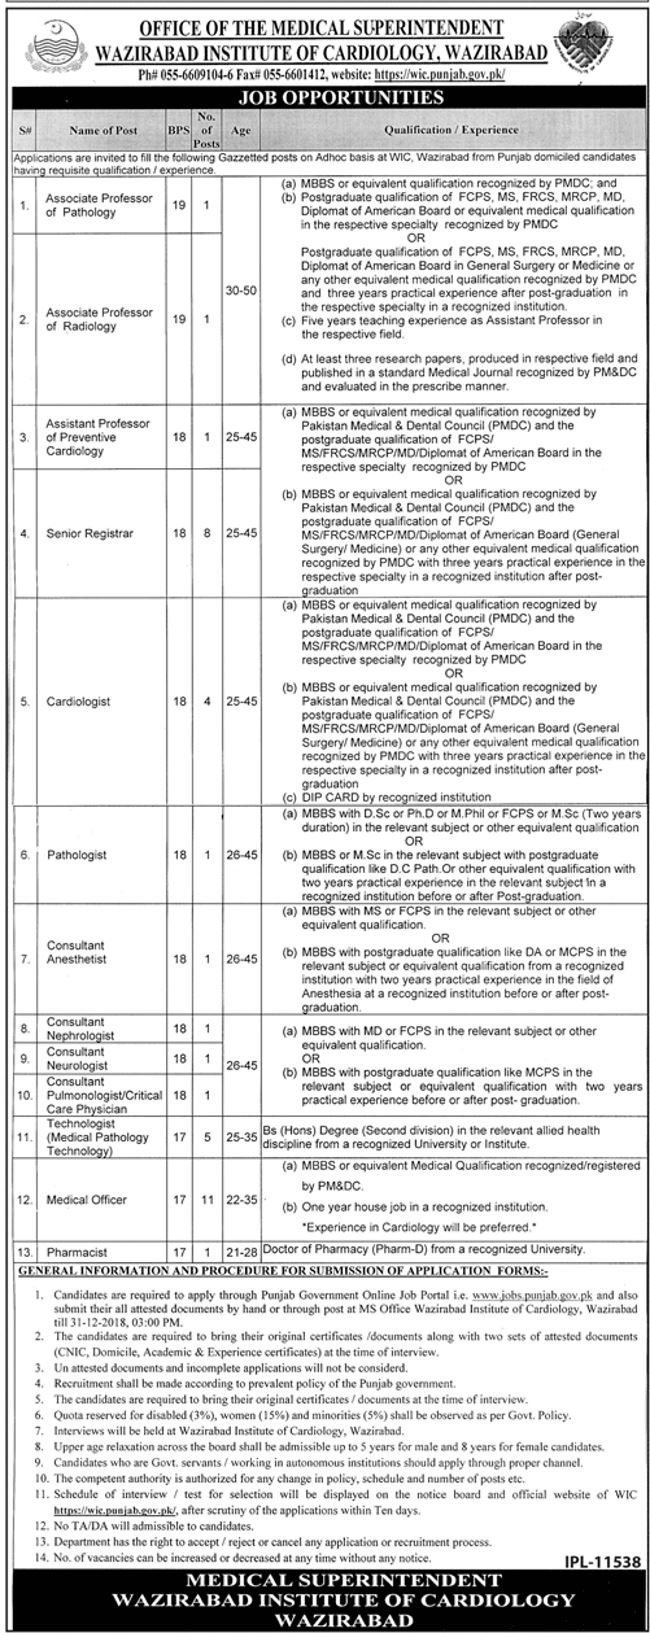 Wazirabad Institute of Cardiology Jobs 2019 for 37+ Posts (Multiple Categories)